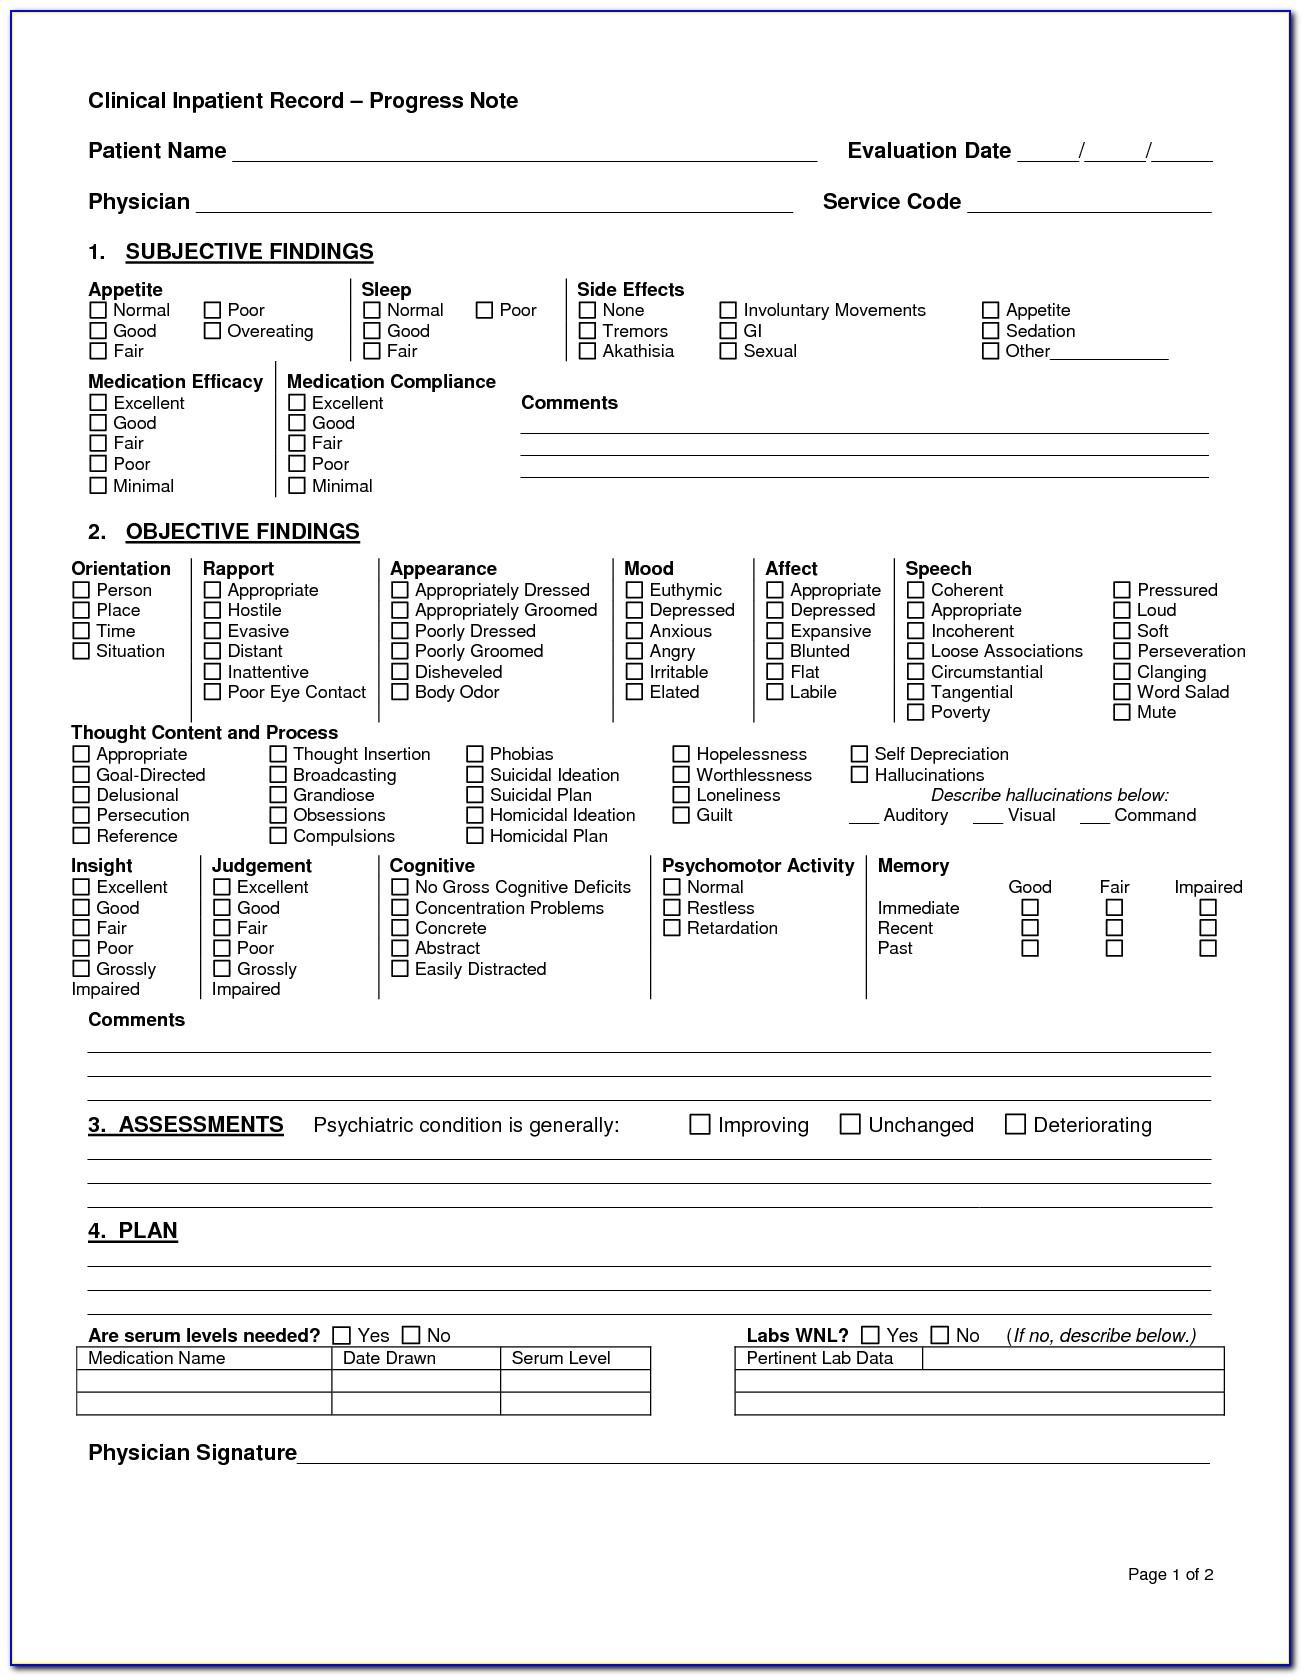 Clinical Progress Note Form